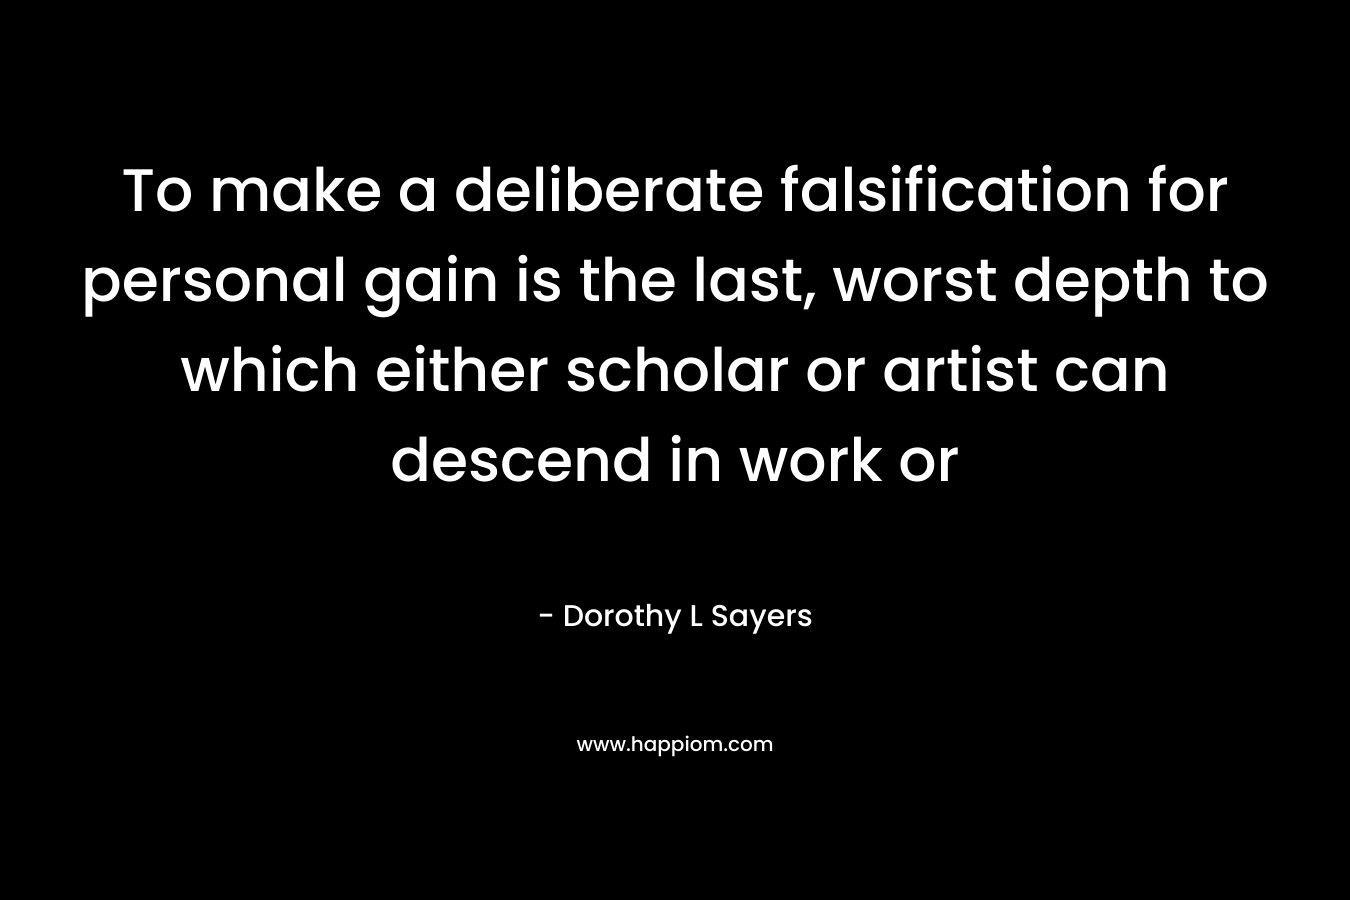 To make a deliberate falsification for personal gain is the last, worst depth to which either scholar or artist can descend in work or